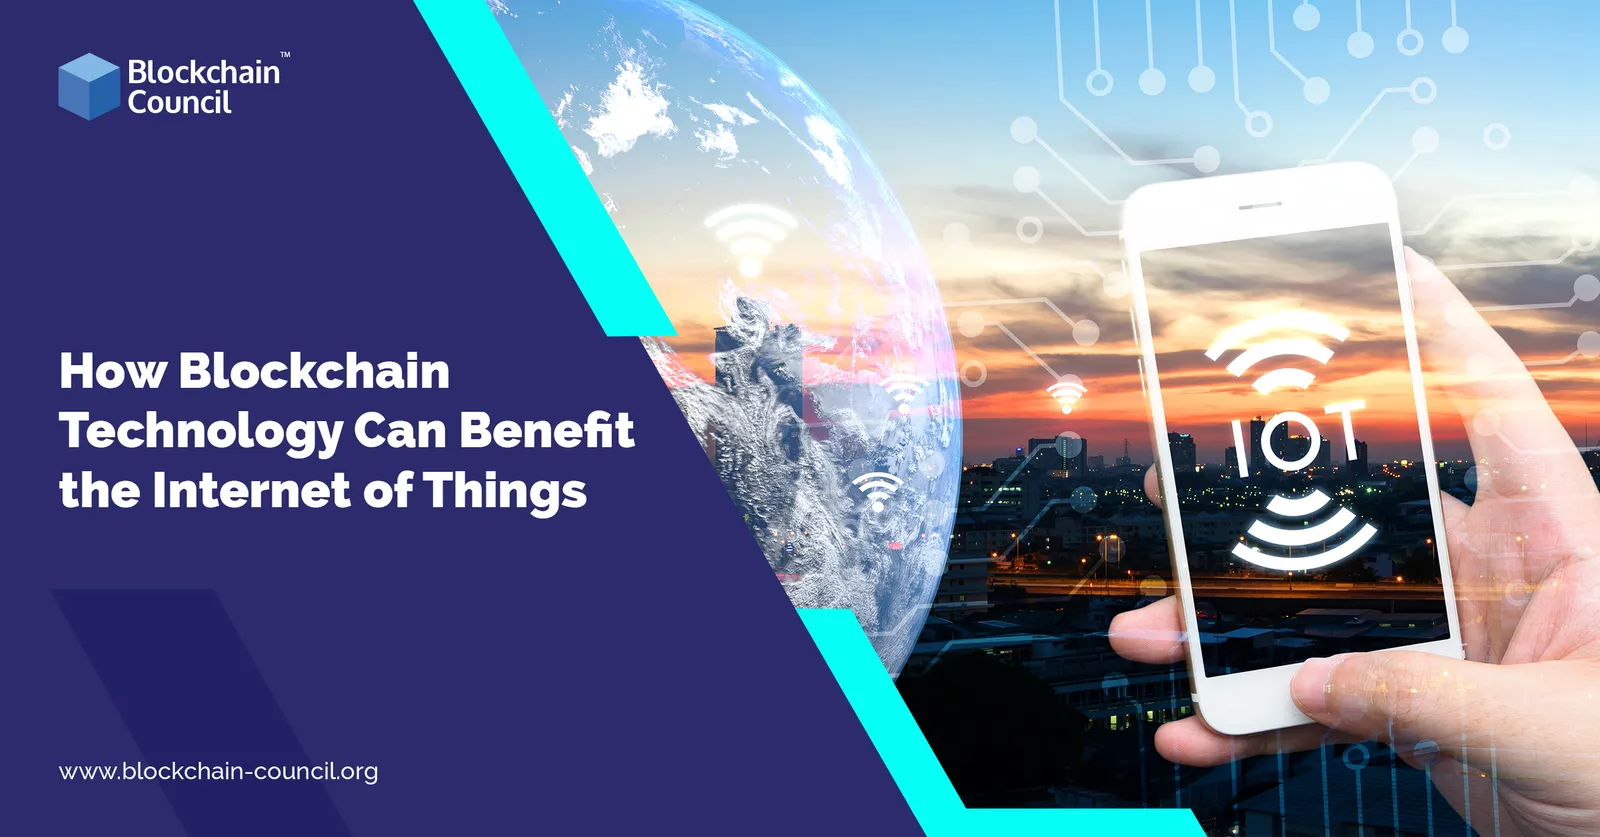 What Are the Benefits of Blockchain Technology for the Internet of Things?